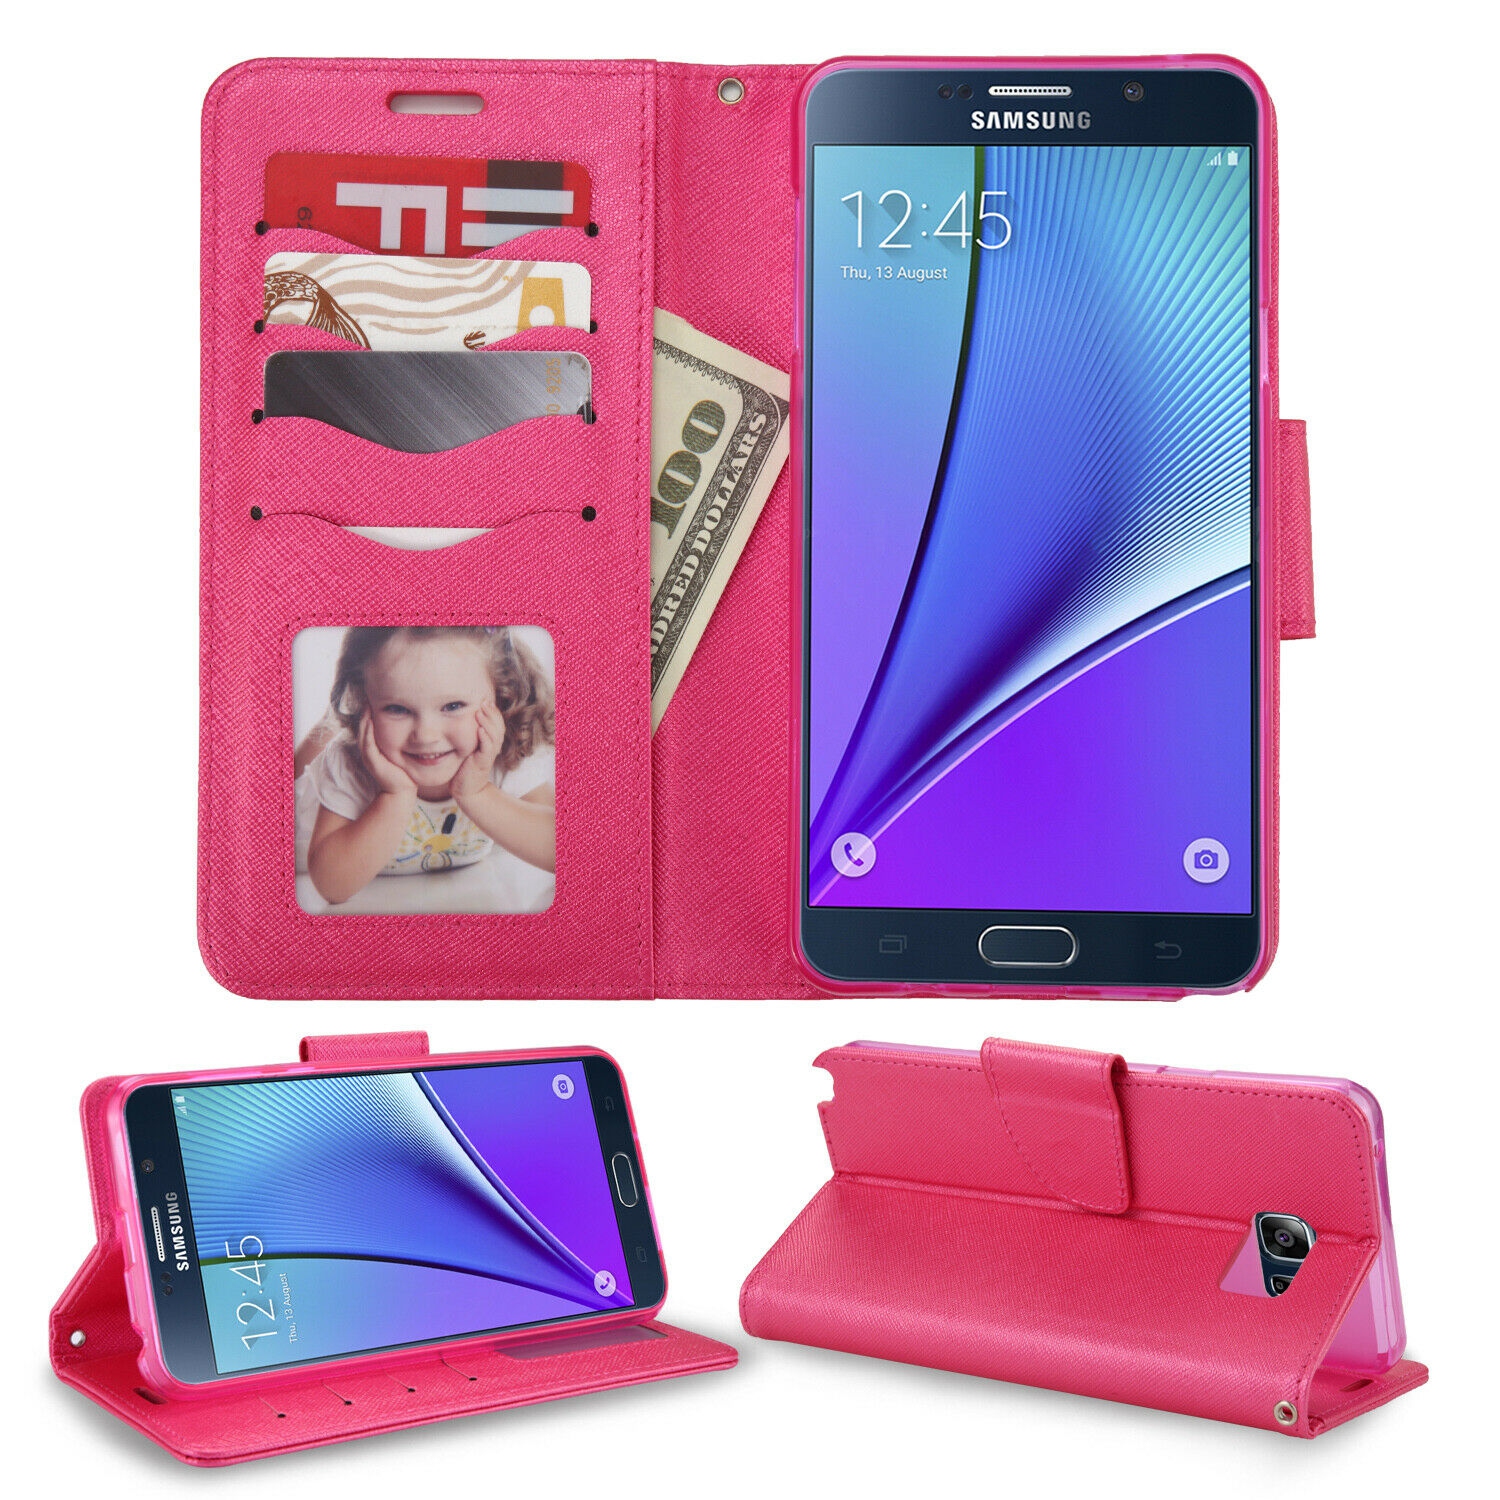 【CSmart】 Magnetic Card Slot Leather Folio Wallet Flip Case Cover for Samsung Galaxy Note 5, Hot Pink